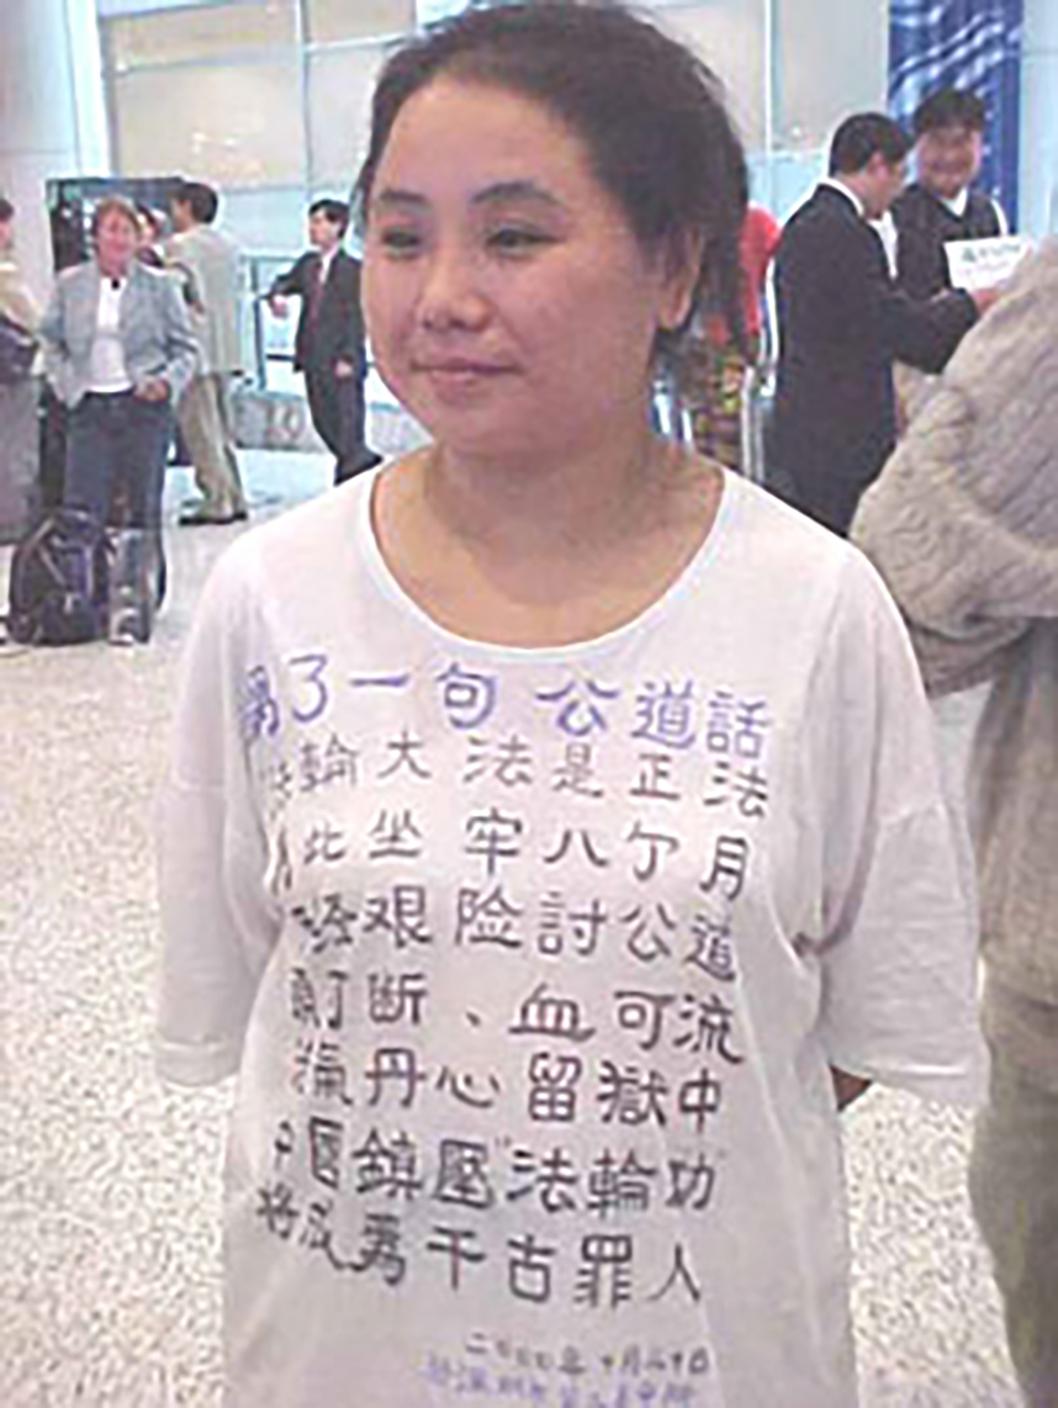 Zhang Cuiying in a T-shirt with a poem exposing the CCP's persecution of Falun Gong, at Shenzhen Airport waiting room, on Nov. 4, 2000. (Courtesy of Zhang Cuiying)